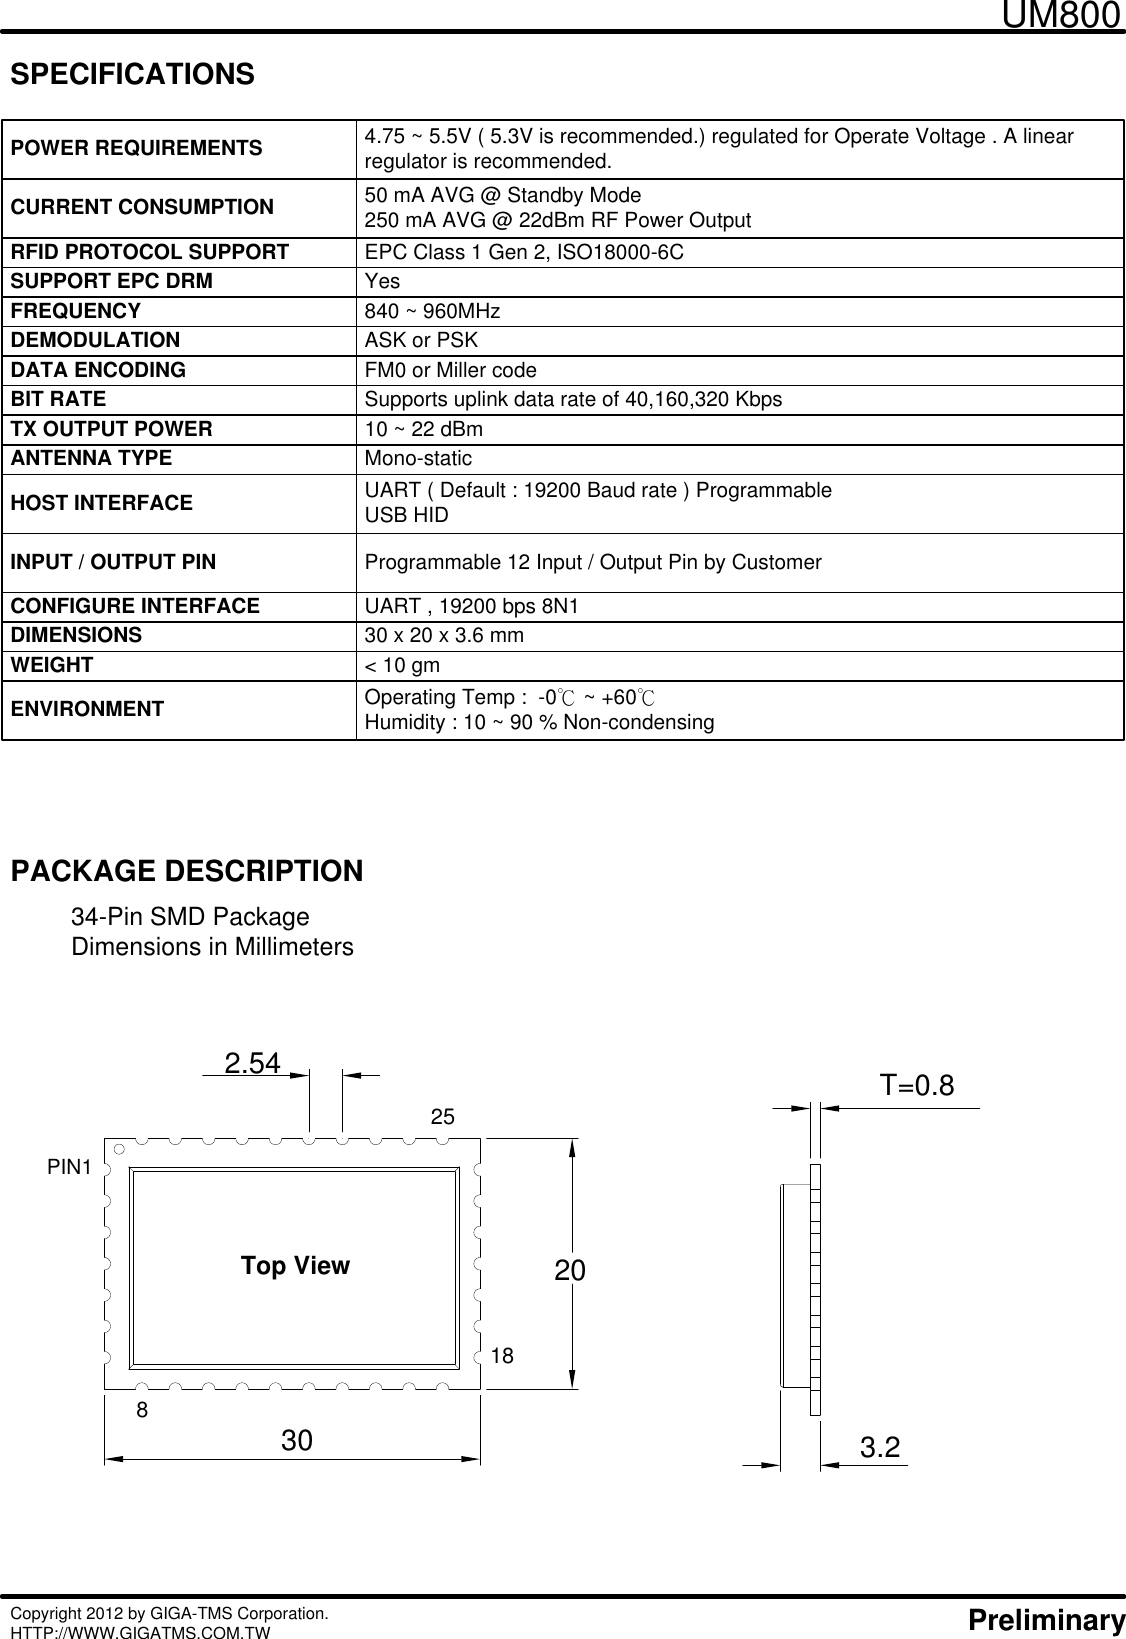 34-Pin SMD PackageDimensions in Millimeters UM800Copyright 2012 by GIGA-TMS Corporation. HTTP://WWW.GIGATMS.COM.TW     PreliminaryPACKAGE DESCRIPTIONSPECIFICATIONSPOWER REQUIREMENTS 4.75 ~ 5.5V ( 5.3V is recommended.) regulated for Operate Voltage . A linear regulator is recommended.CURRENT CONSUMPTION 50 mA AVG @ Standby Mode250 mA AVG @ 22dBm RF Power OutputHOST INTERFACE UART ( Default : 19200 Baud rate ) ProgrammableUSB HIDFREQUENCY 840 ~ 960MHz DEMODULATION ASK or PSKCONFIGURE INTERFACE UART , 19200 bps 8N1 DIMENSIONS 30 x 20 x 3.6 mmWEIGHT &lt; 10 gmENVIRONMENT Operating Temp :  -0℃ ~ +60℃Humidity : 10 ~ 90 % Non-condensingSUPPORT EPC DRM YesRFID PROTOCOL SUPPORT EPC Class 1 Gen 2, ISO18000-6CDATA ENCODING FM0 or Miller codeBIT RATE Supports uplink data rate of 40,160,320 KbpsTX OUTPUT POWER 10 ~ 22 dBmANTENNA TYPE Mono-staticINPUT / OUTPUT PIN Programmable 12 Input / Output Pin by Customer25188Top View3020PIN12.54 T=0.83.2